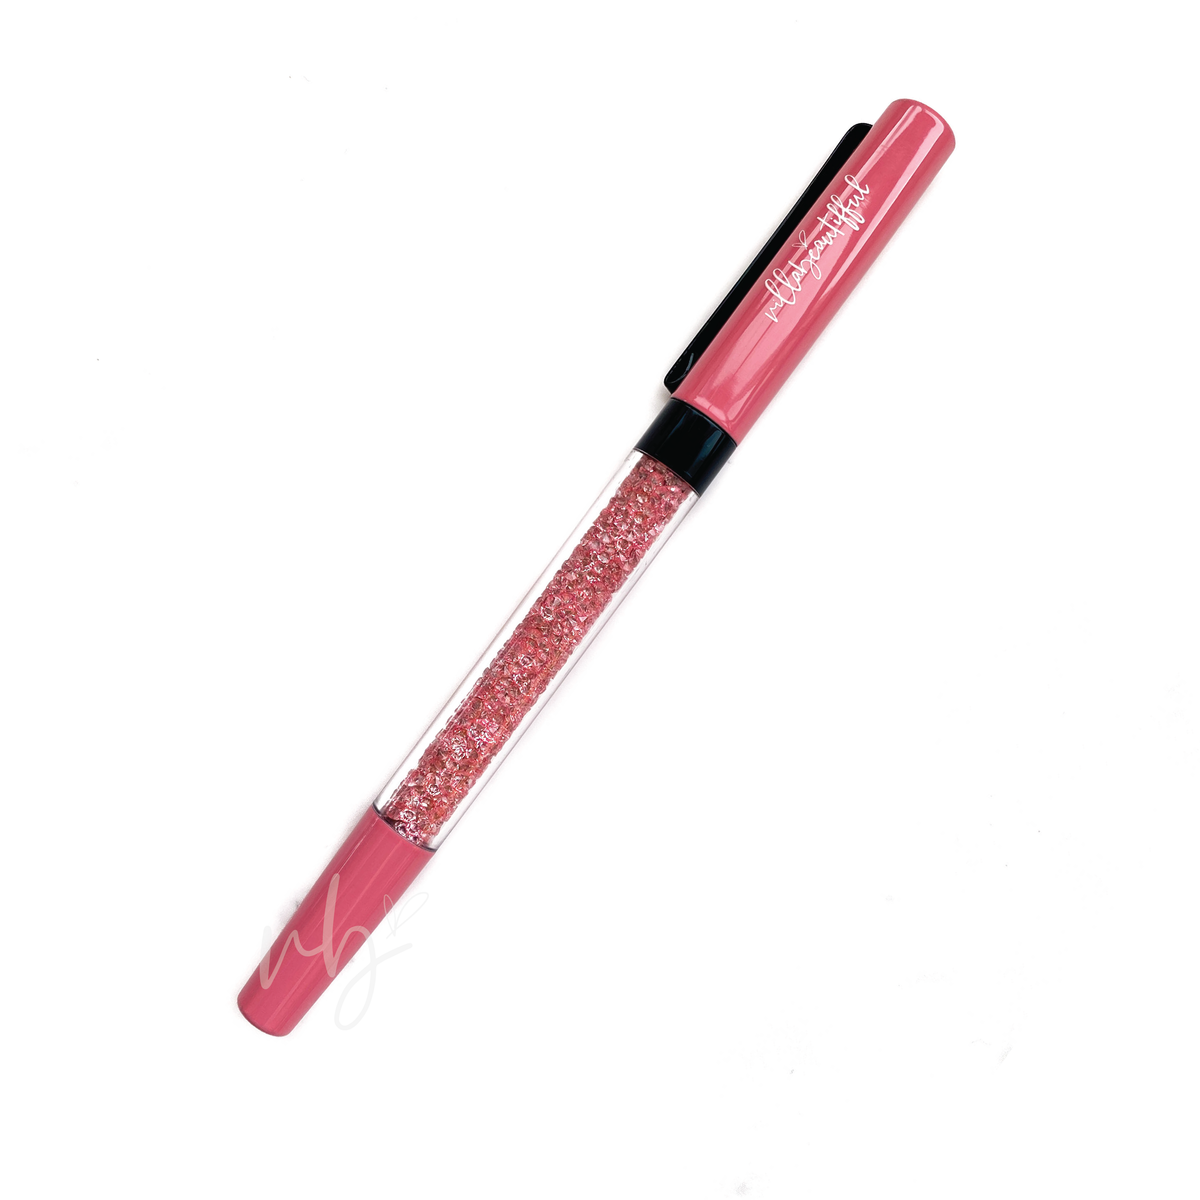 Warm Wishes Crystal VBPen | limited pen